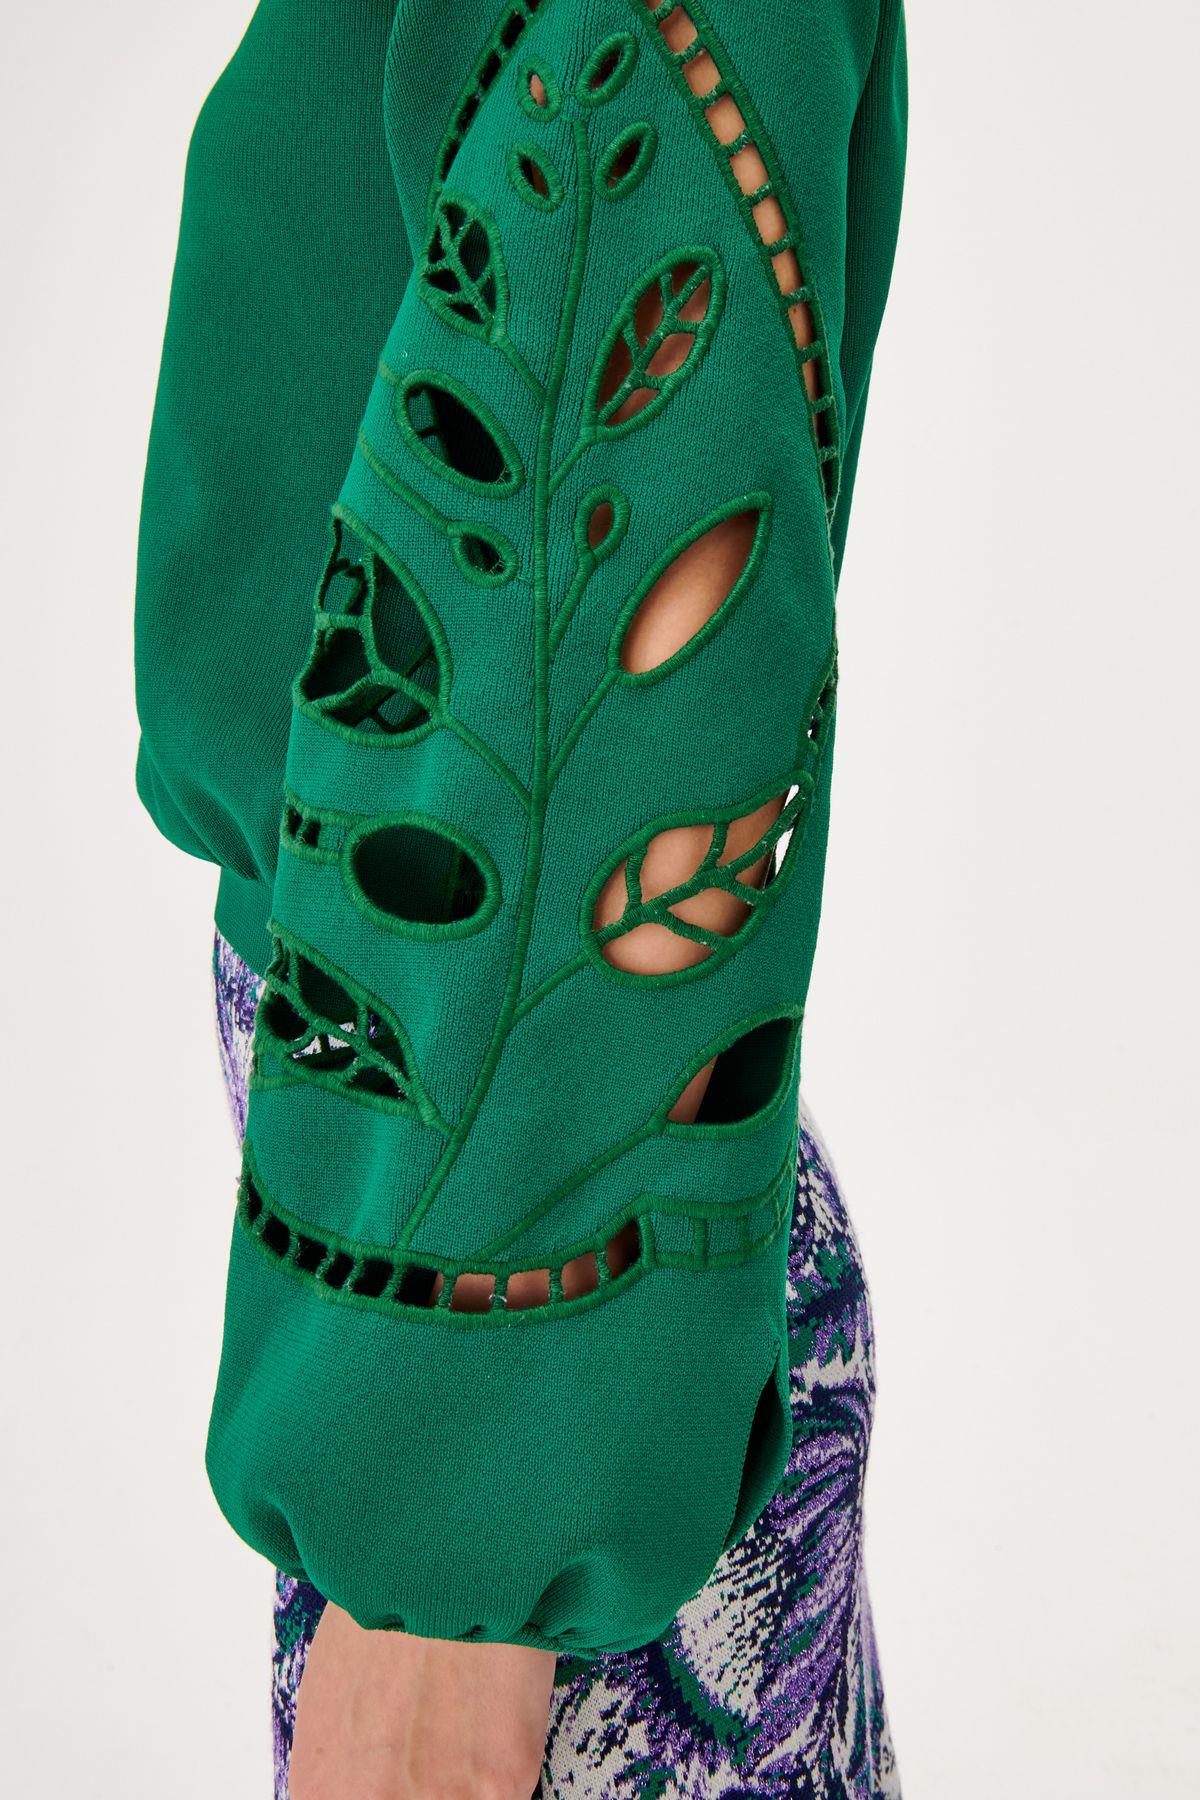 High Collar Sleeve Embroidered Green Knitwear Sweater